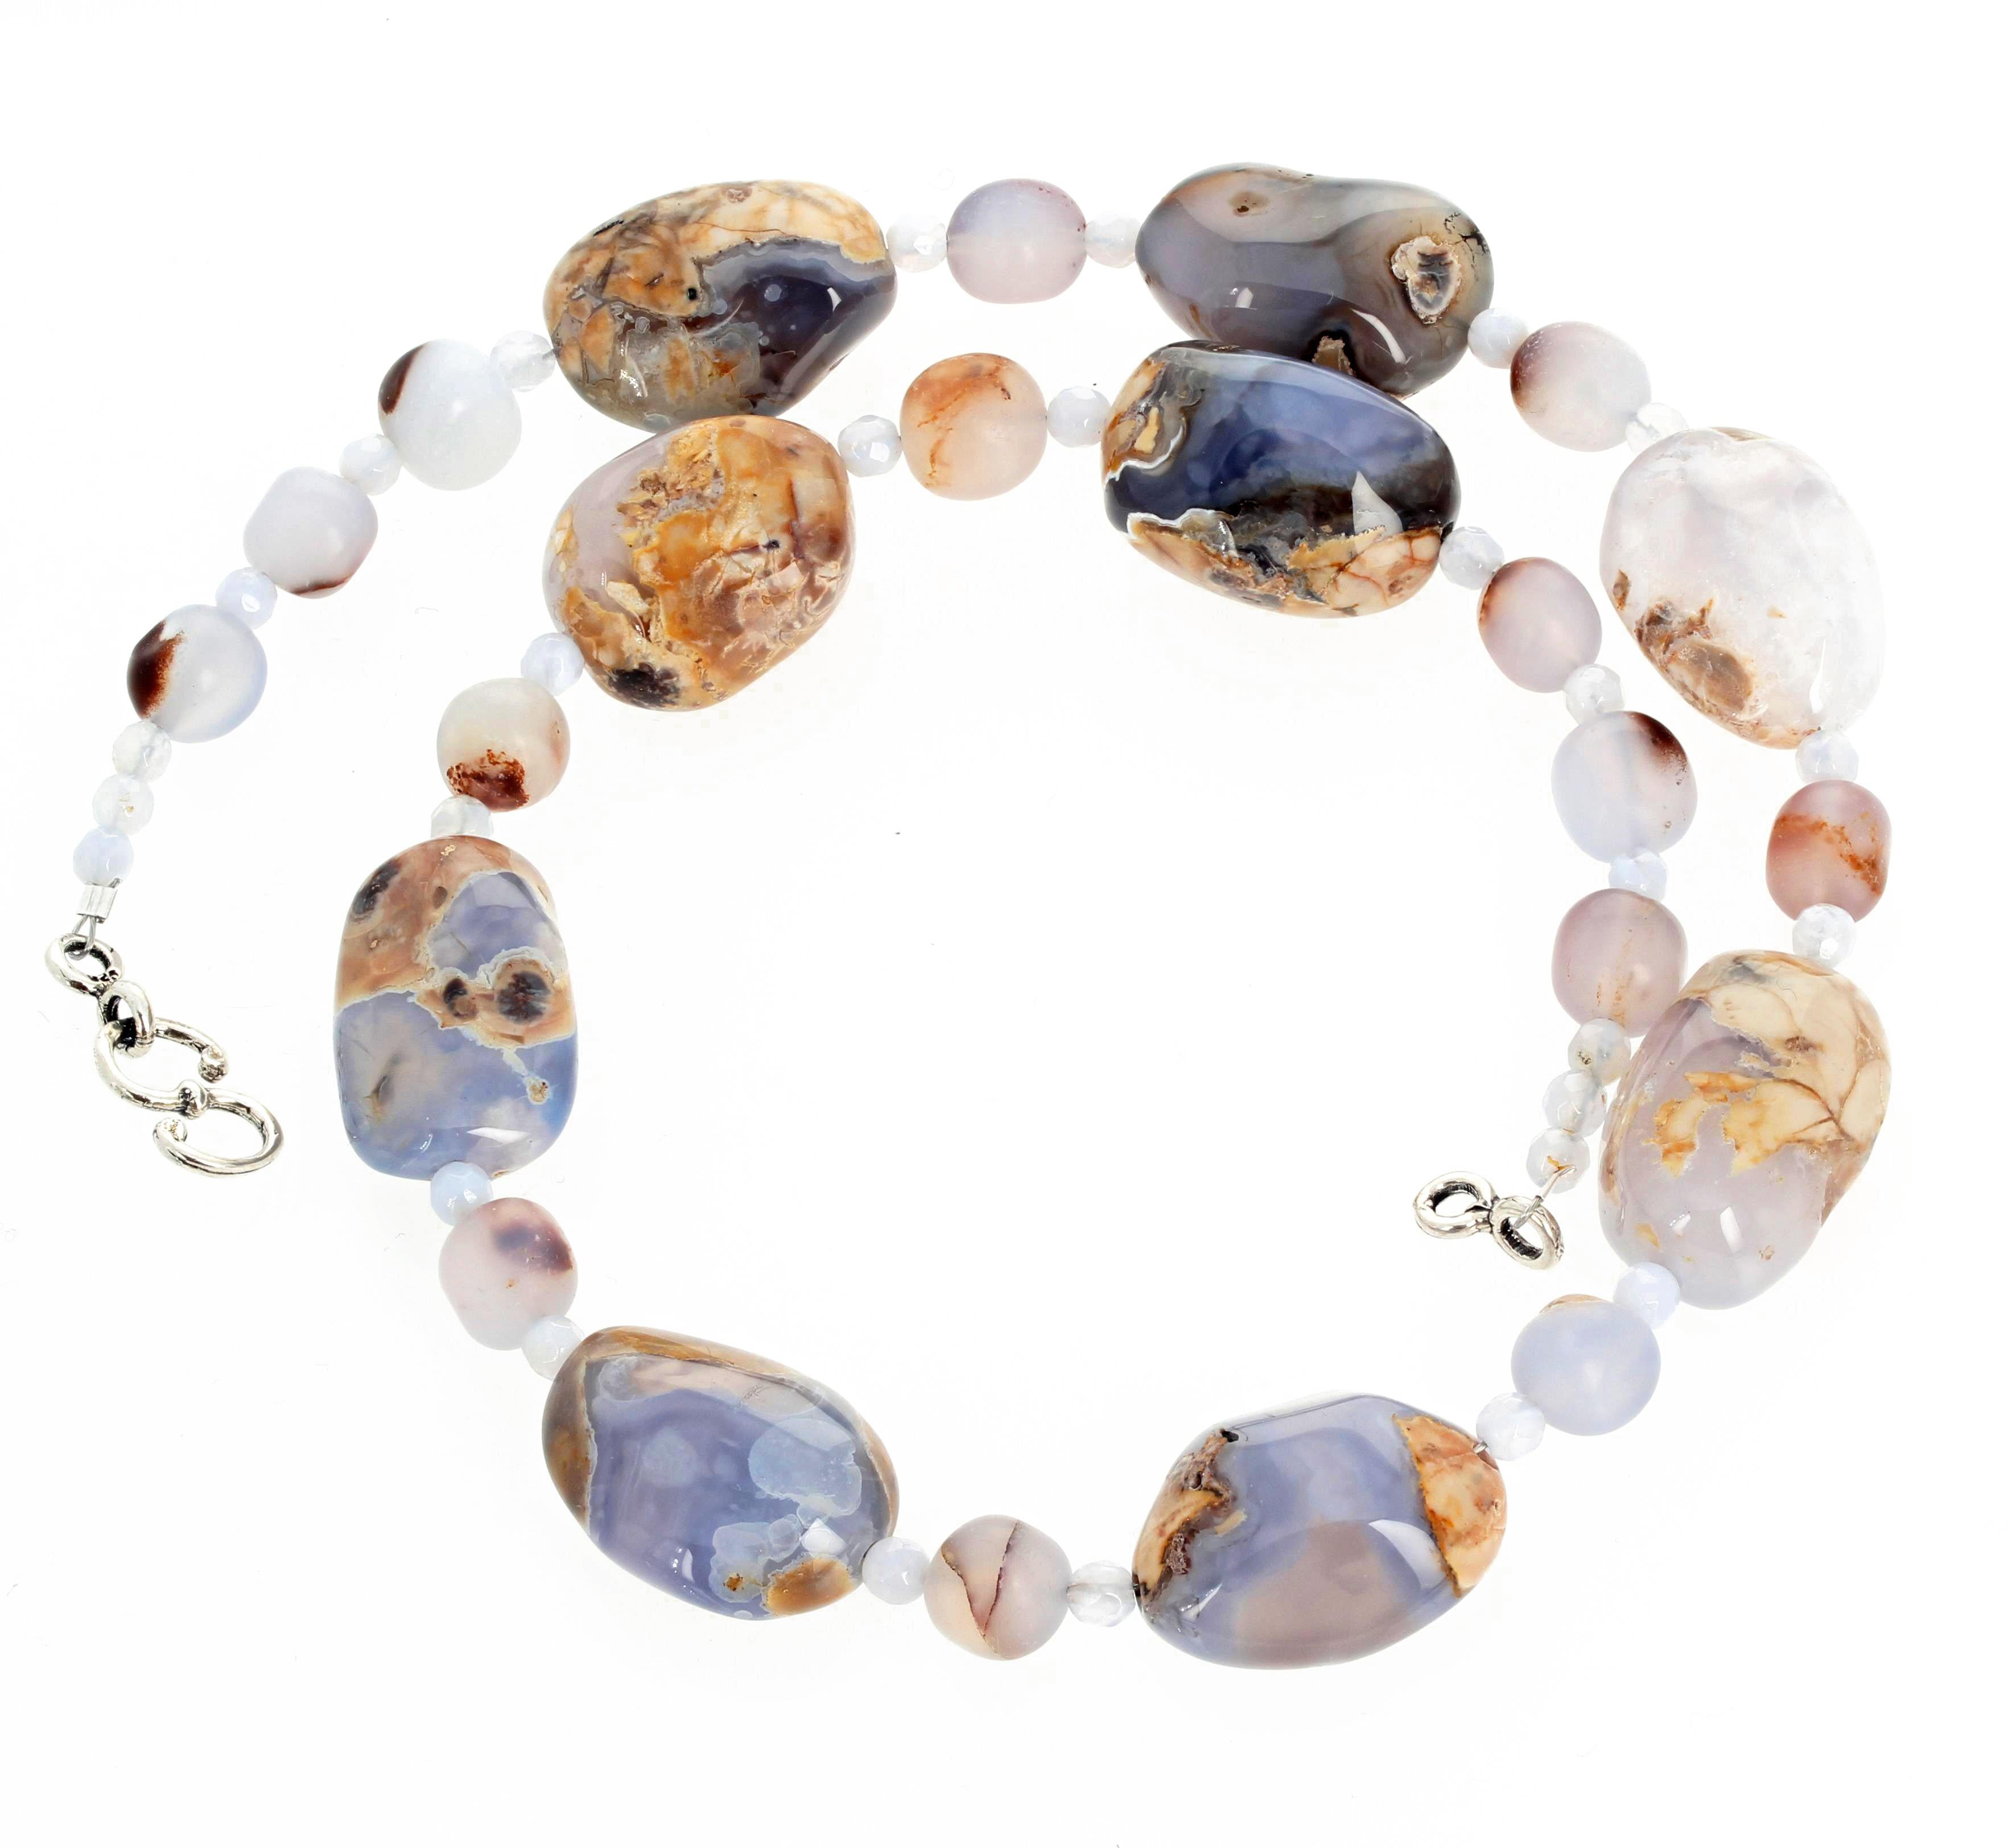 Chalcedony, Chalcedony and Chalcedony Necklace 2